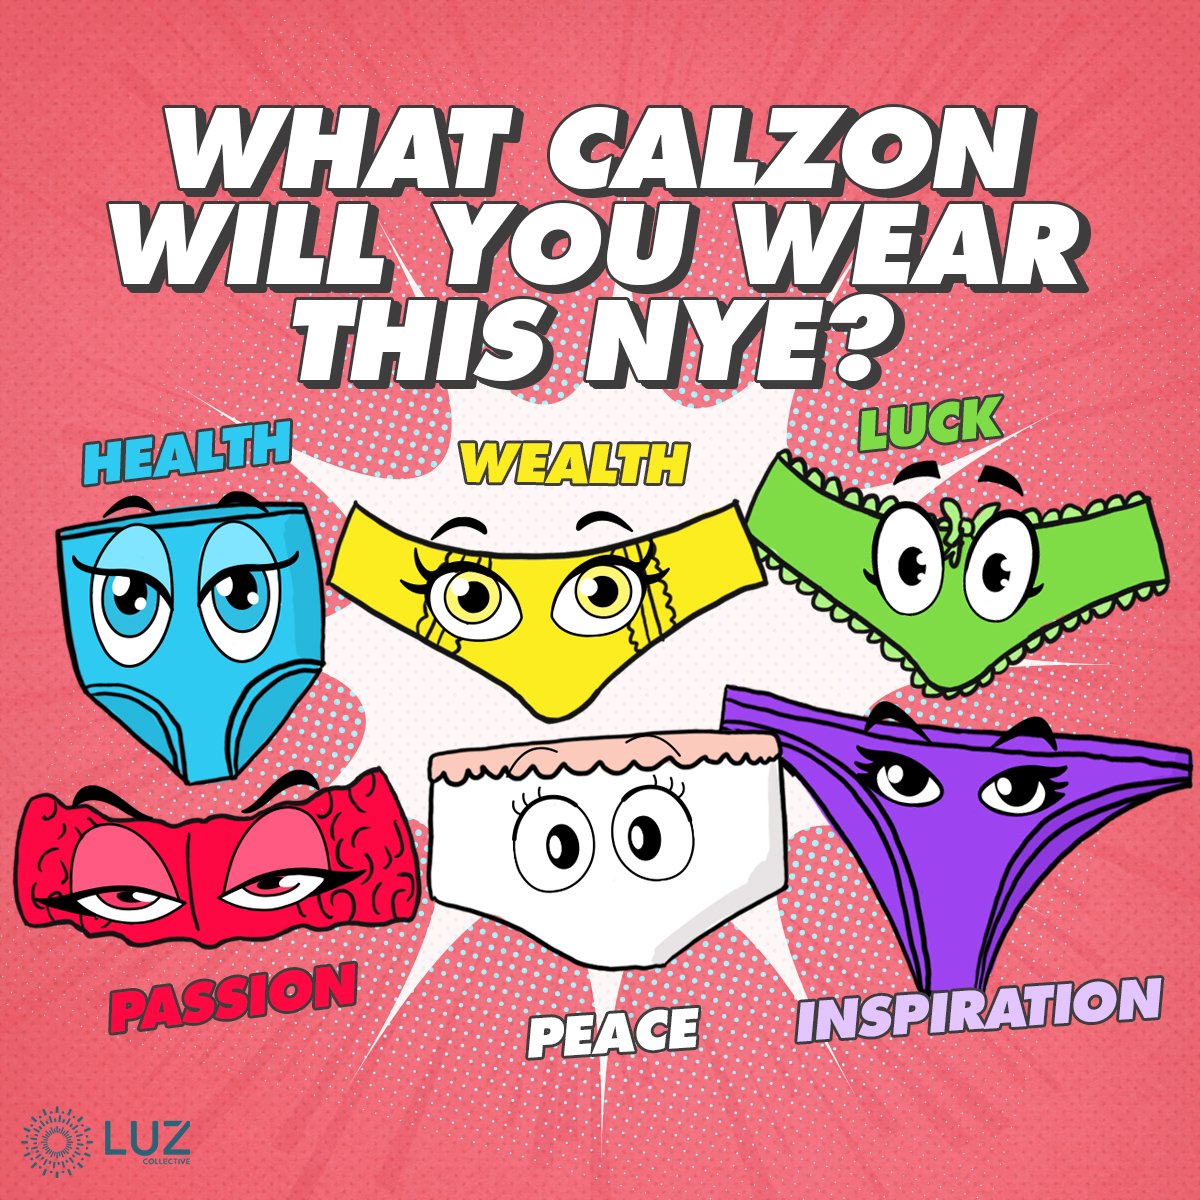 Luz Media on X: Manifest your luck for 2021 by wearing calzones